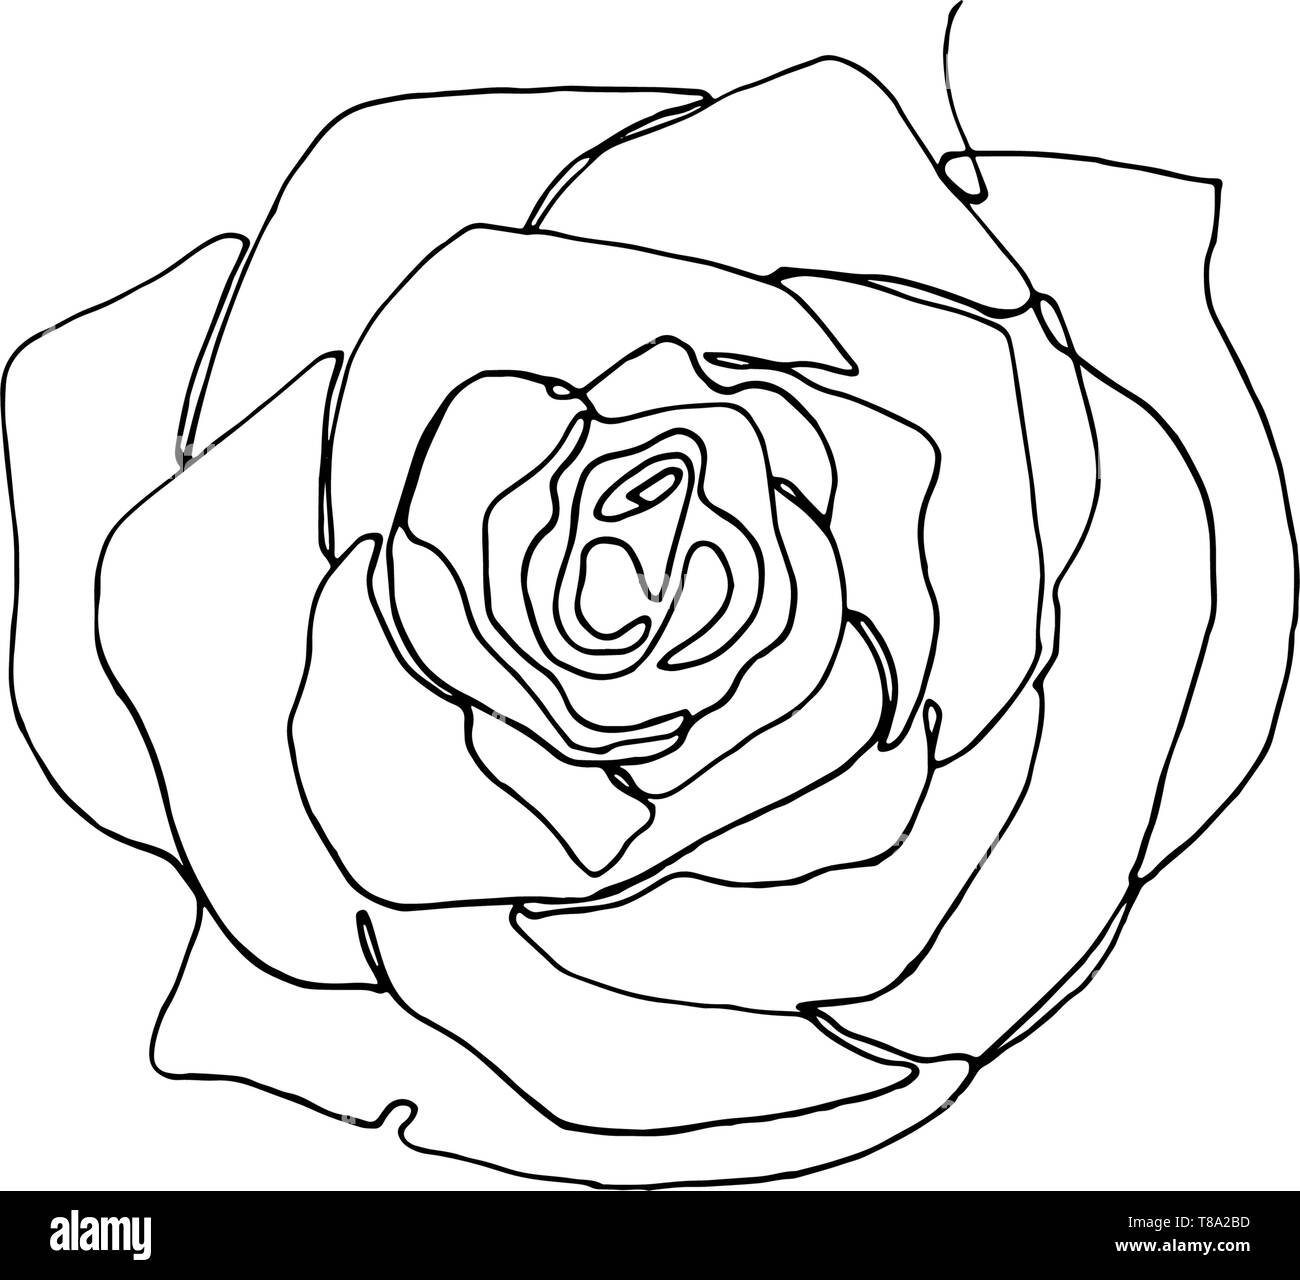 Hand drawn rose flower, one single continuous line drawing Stock ...